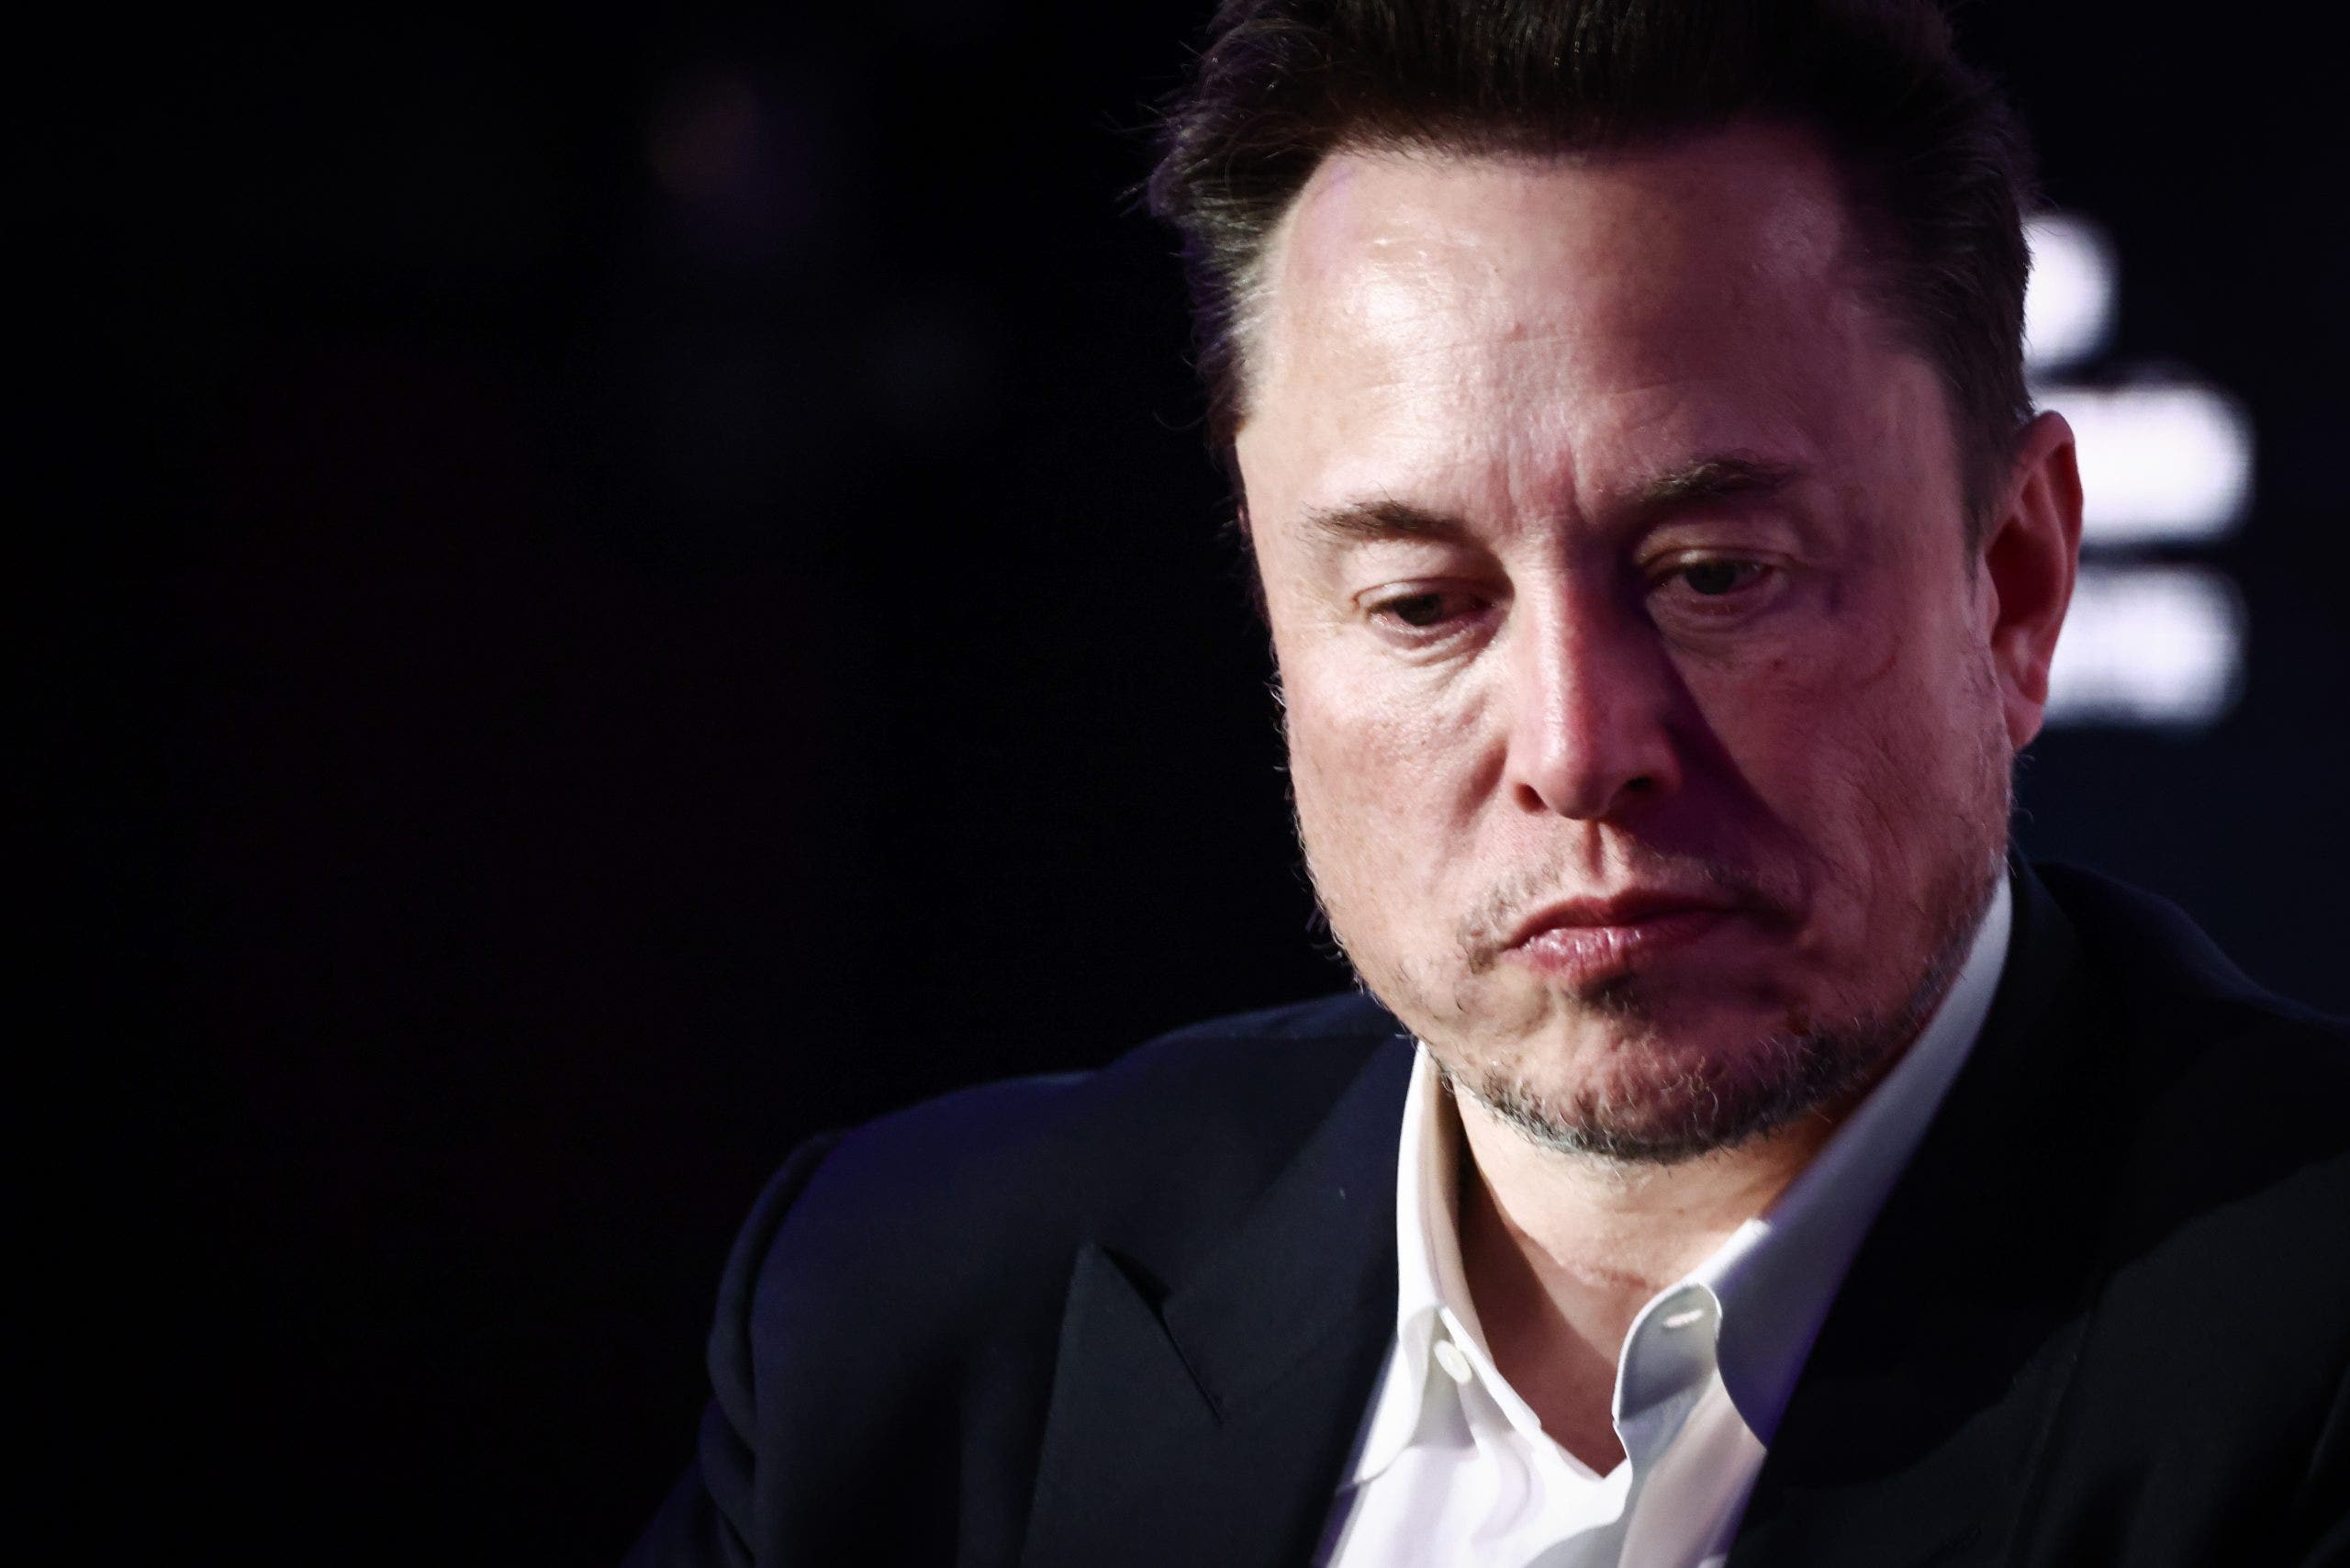 Around the world, parents resonate with Elon Musk as victims of trans ideology